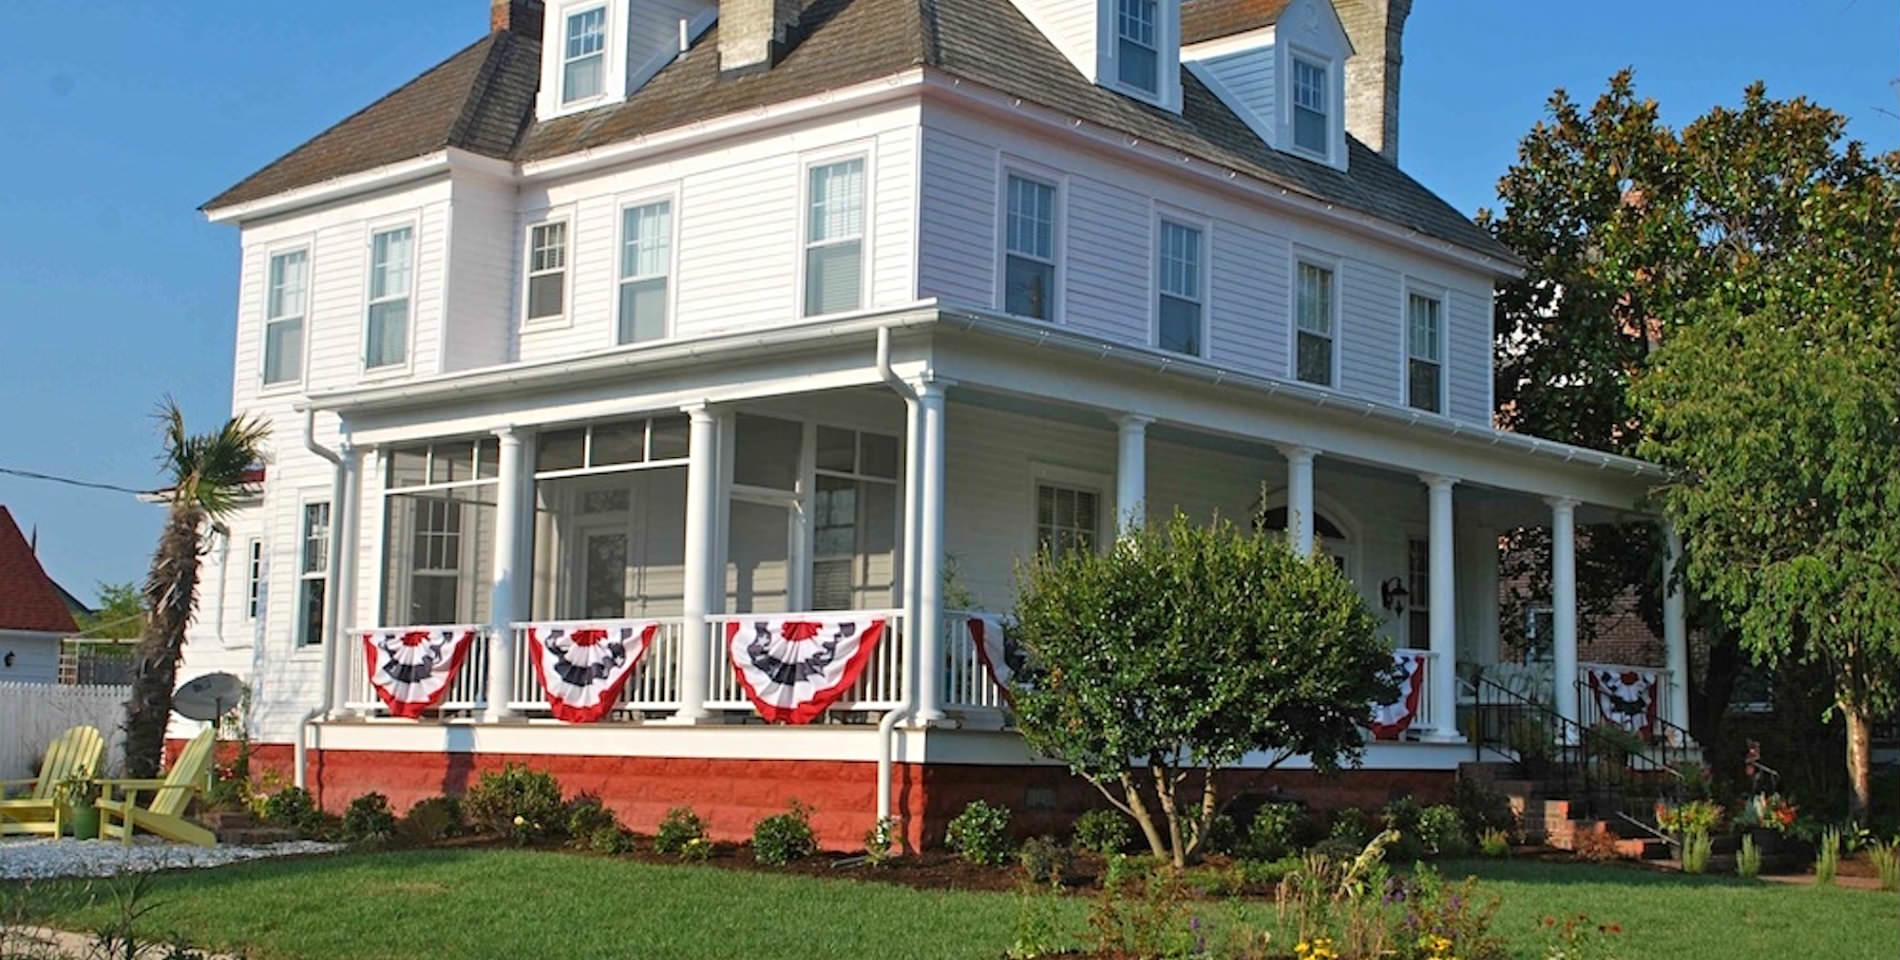 The Inn with a large wraparound front porch with red, white and blue festive bunting hanging from the porch railing. 